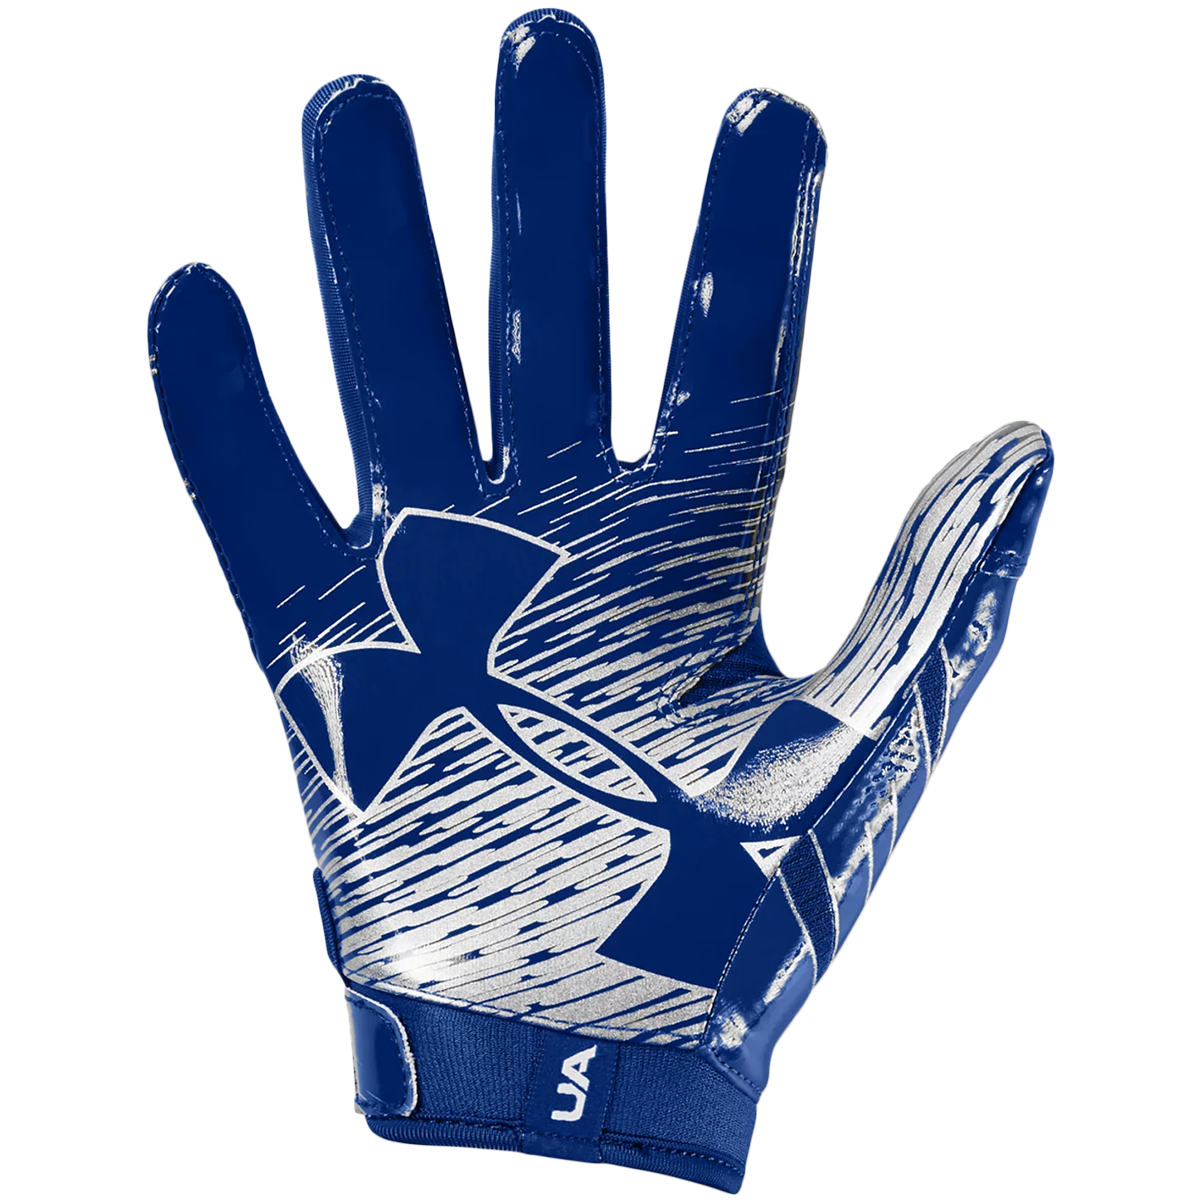 Youth F7 Football Gloves alternate view